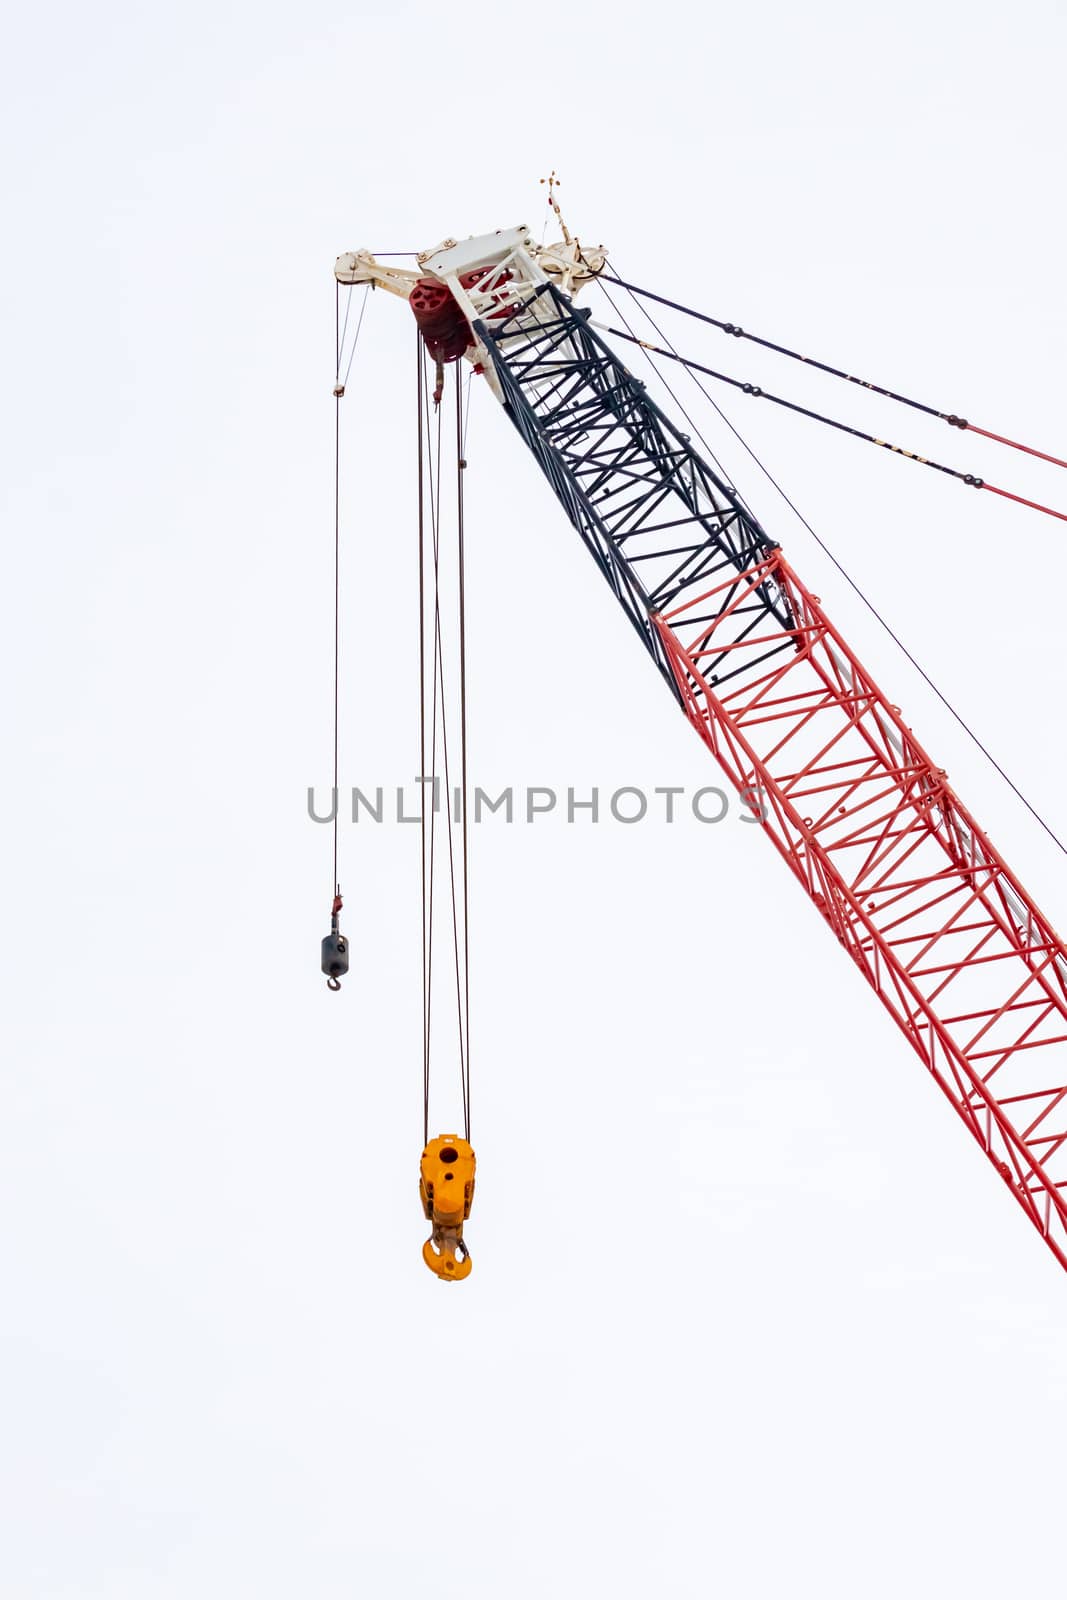 Construction Crane Without Load by colintemple